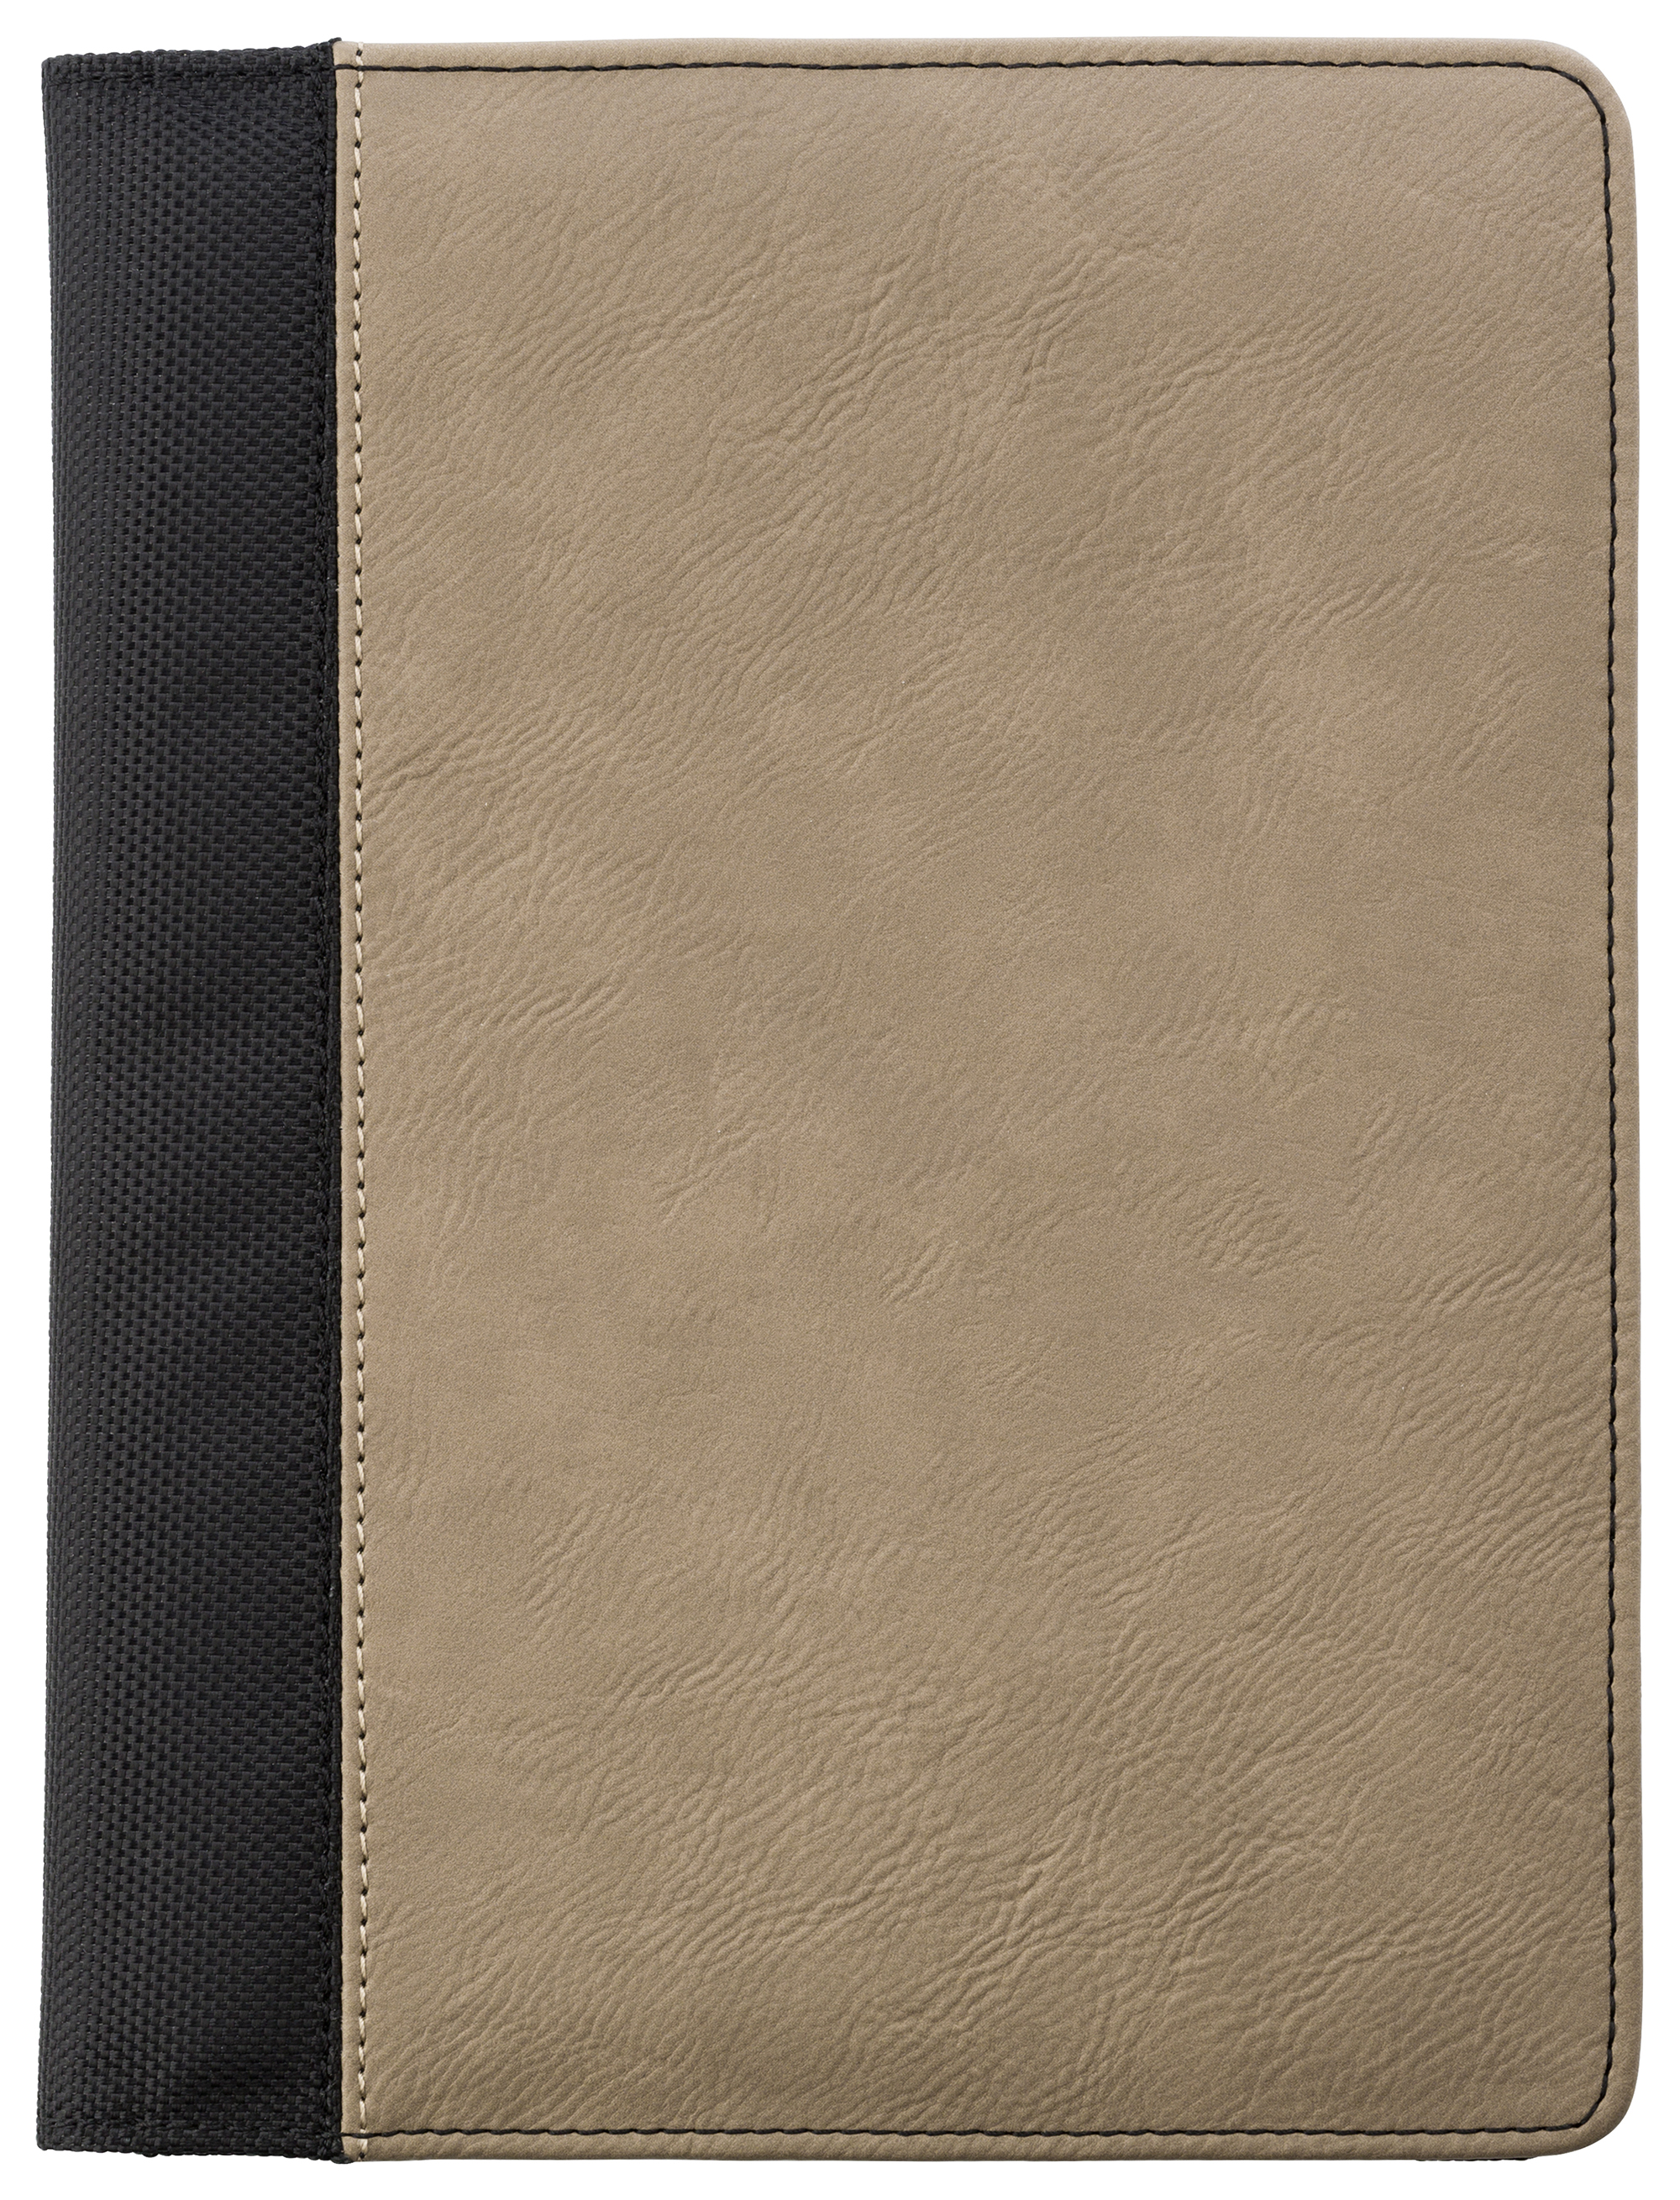 Promotional A5 Pad folio with PU cover,  a large internal pocket, one smaller sewed on pocket, an elasticated pen loop, and a 50 page lines note pad. 